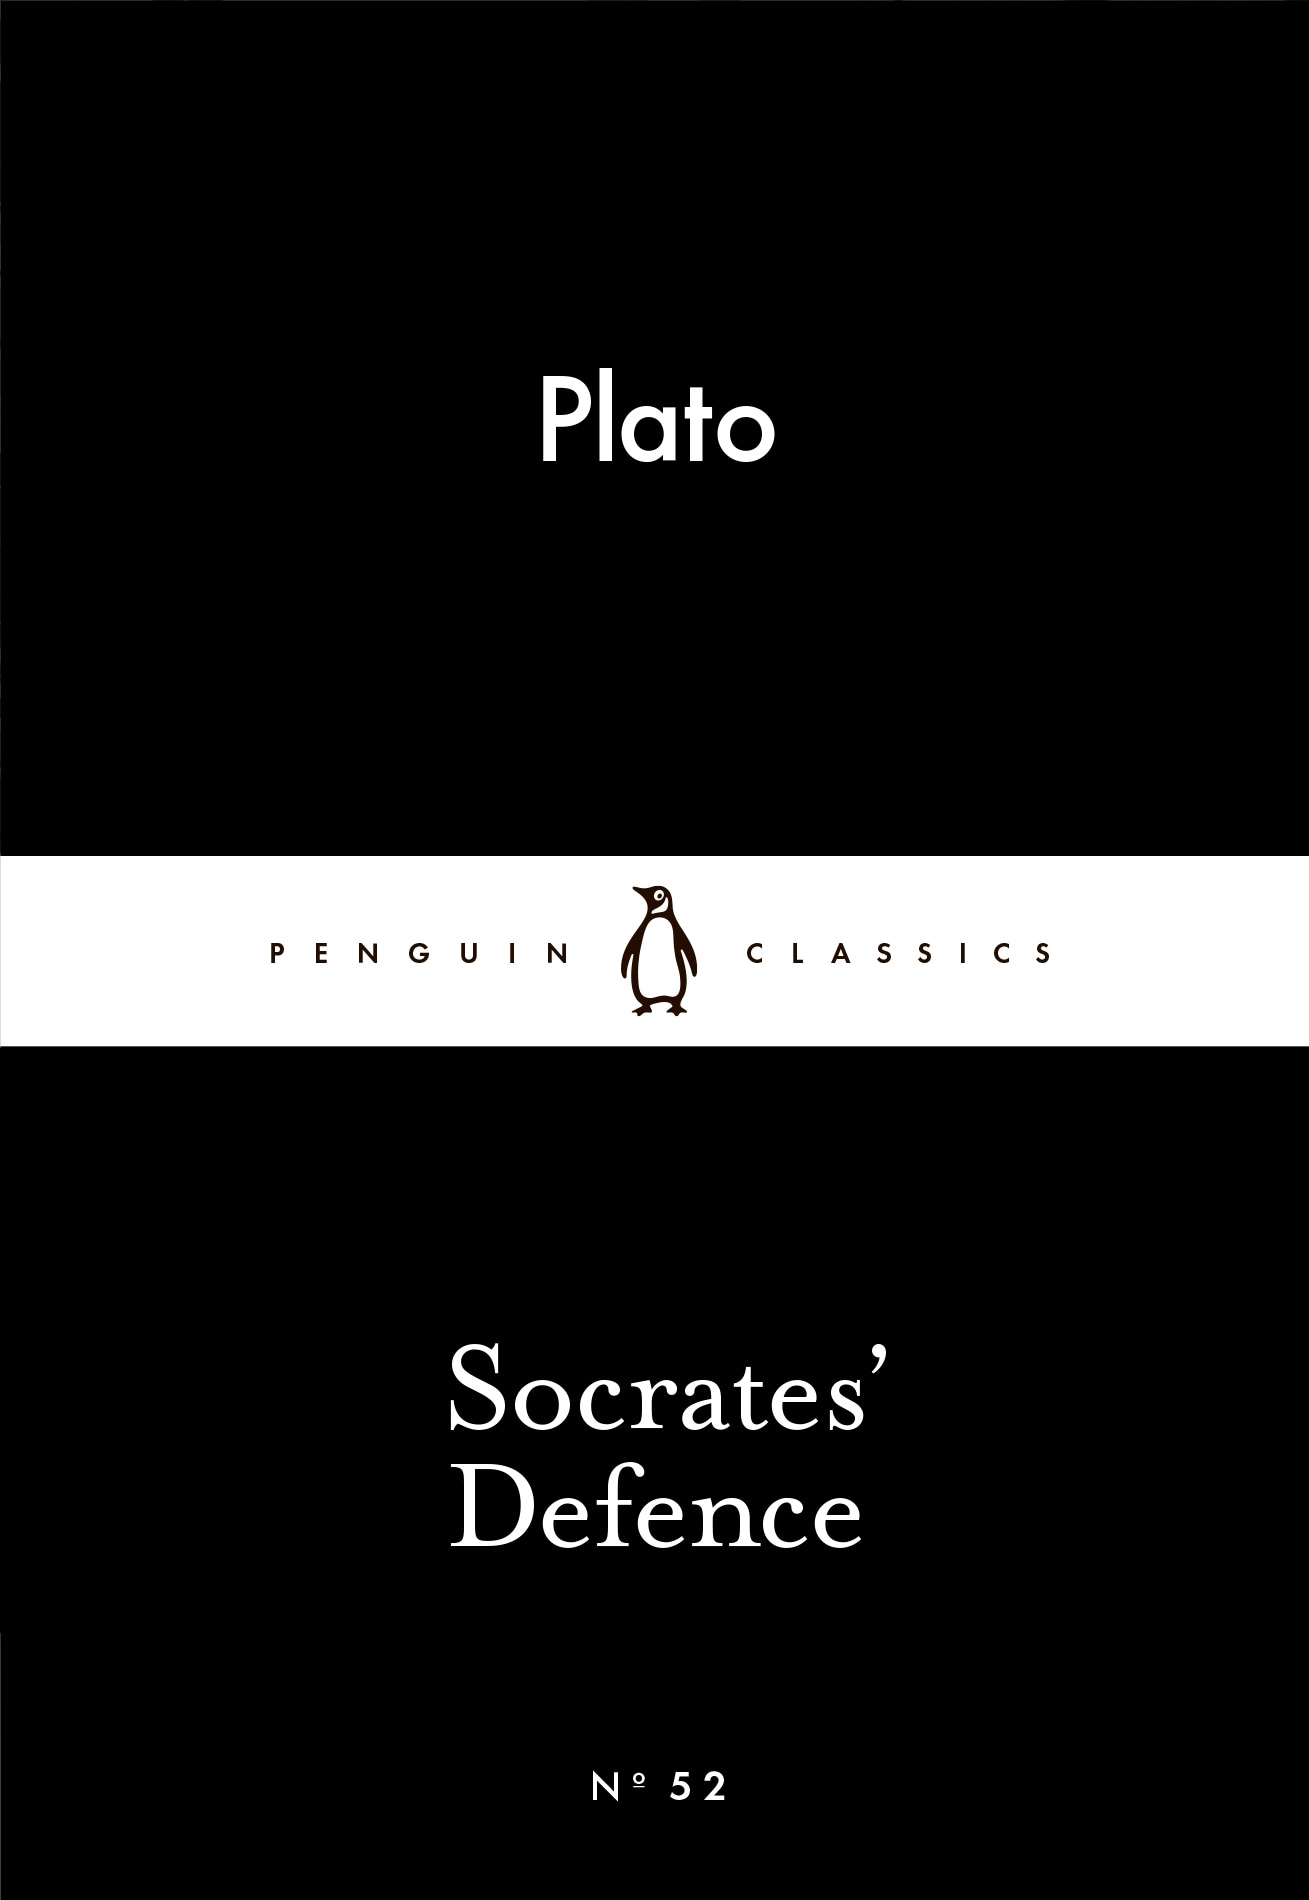 Book “Socrates' Defence” by Plato — February 26, 2015